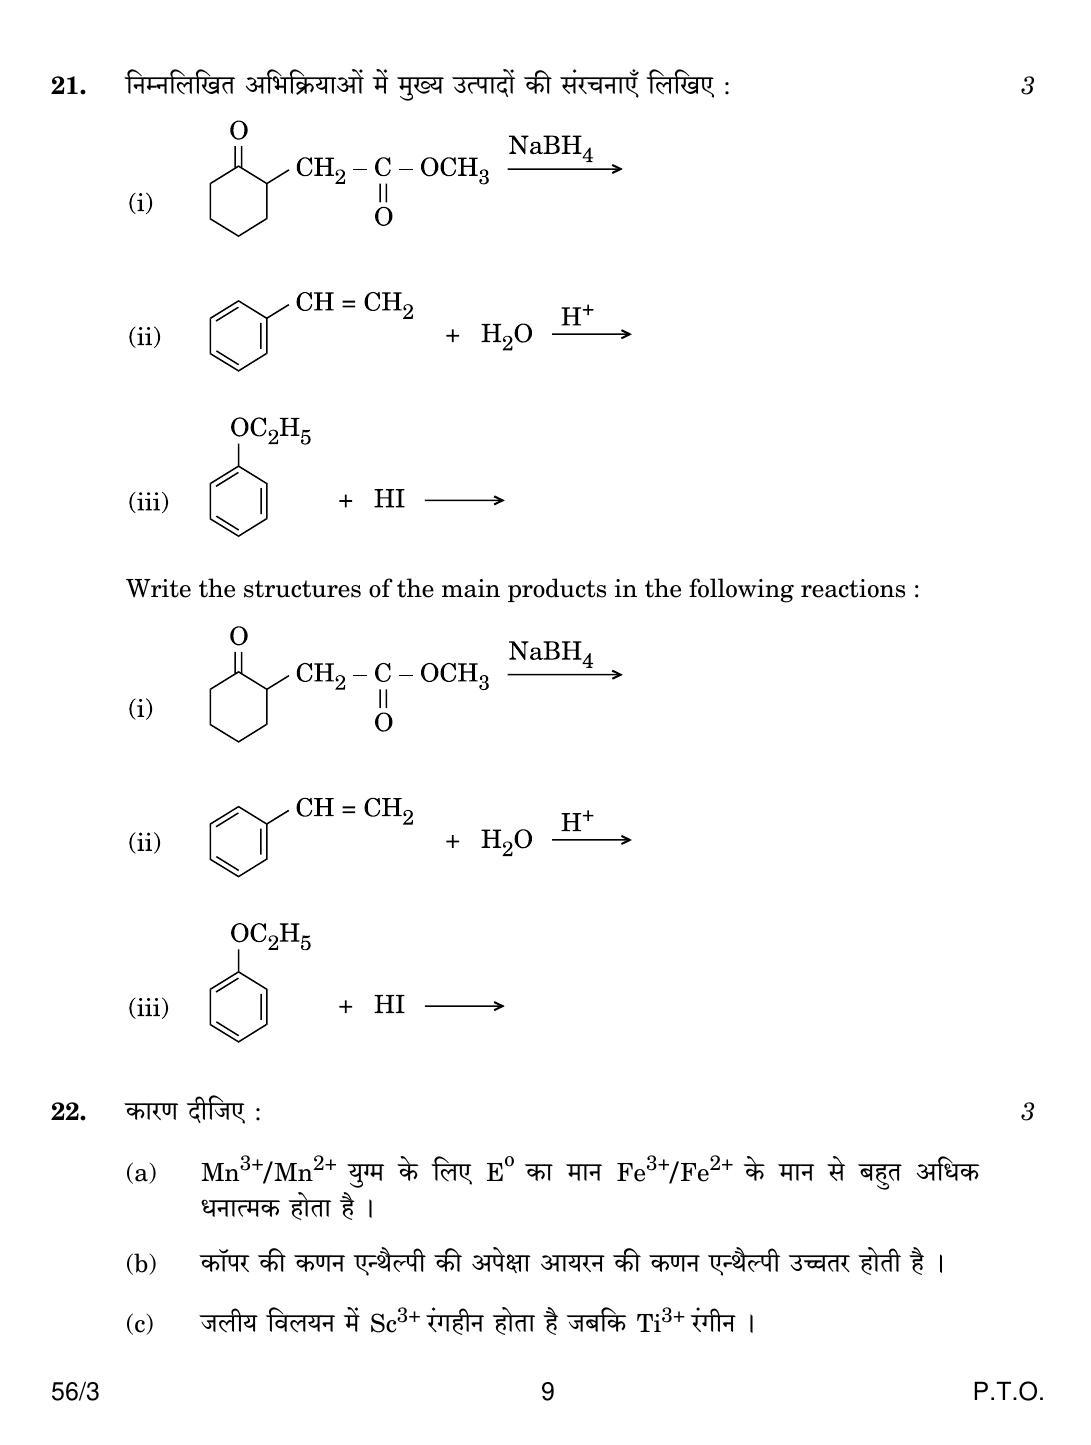 CBSE Class 12 56-3 CHEMISTRY 2018 Question Paper - Page 9